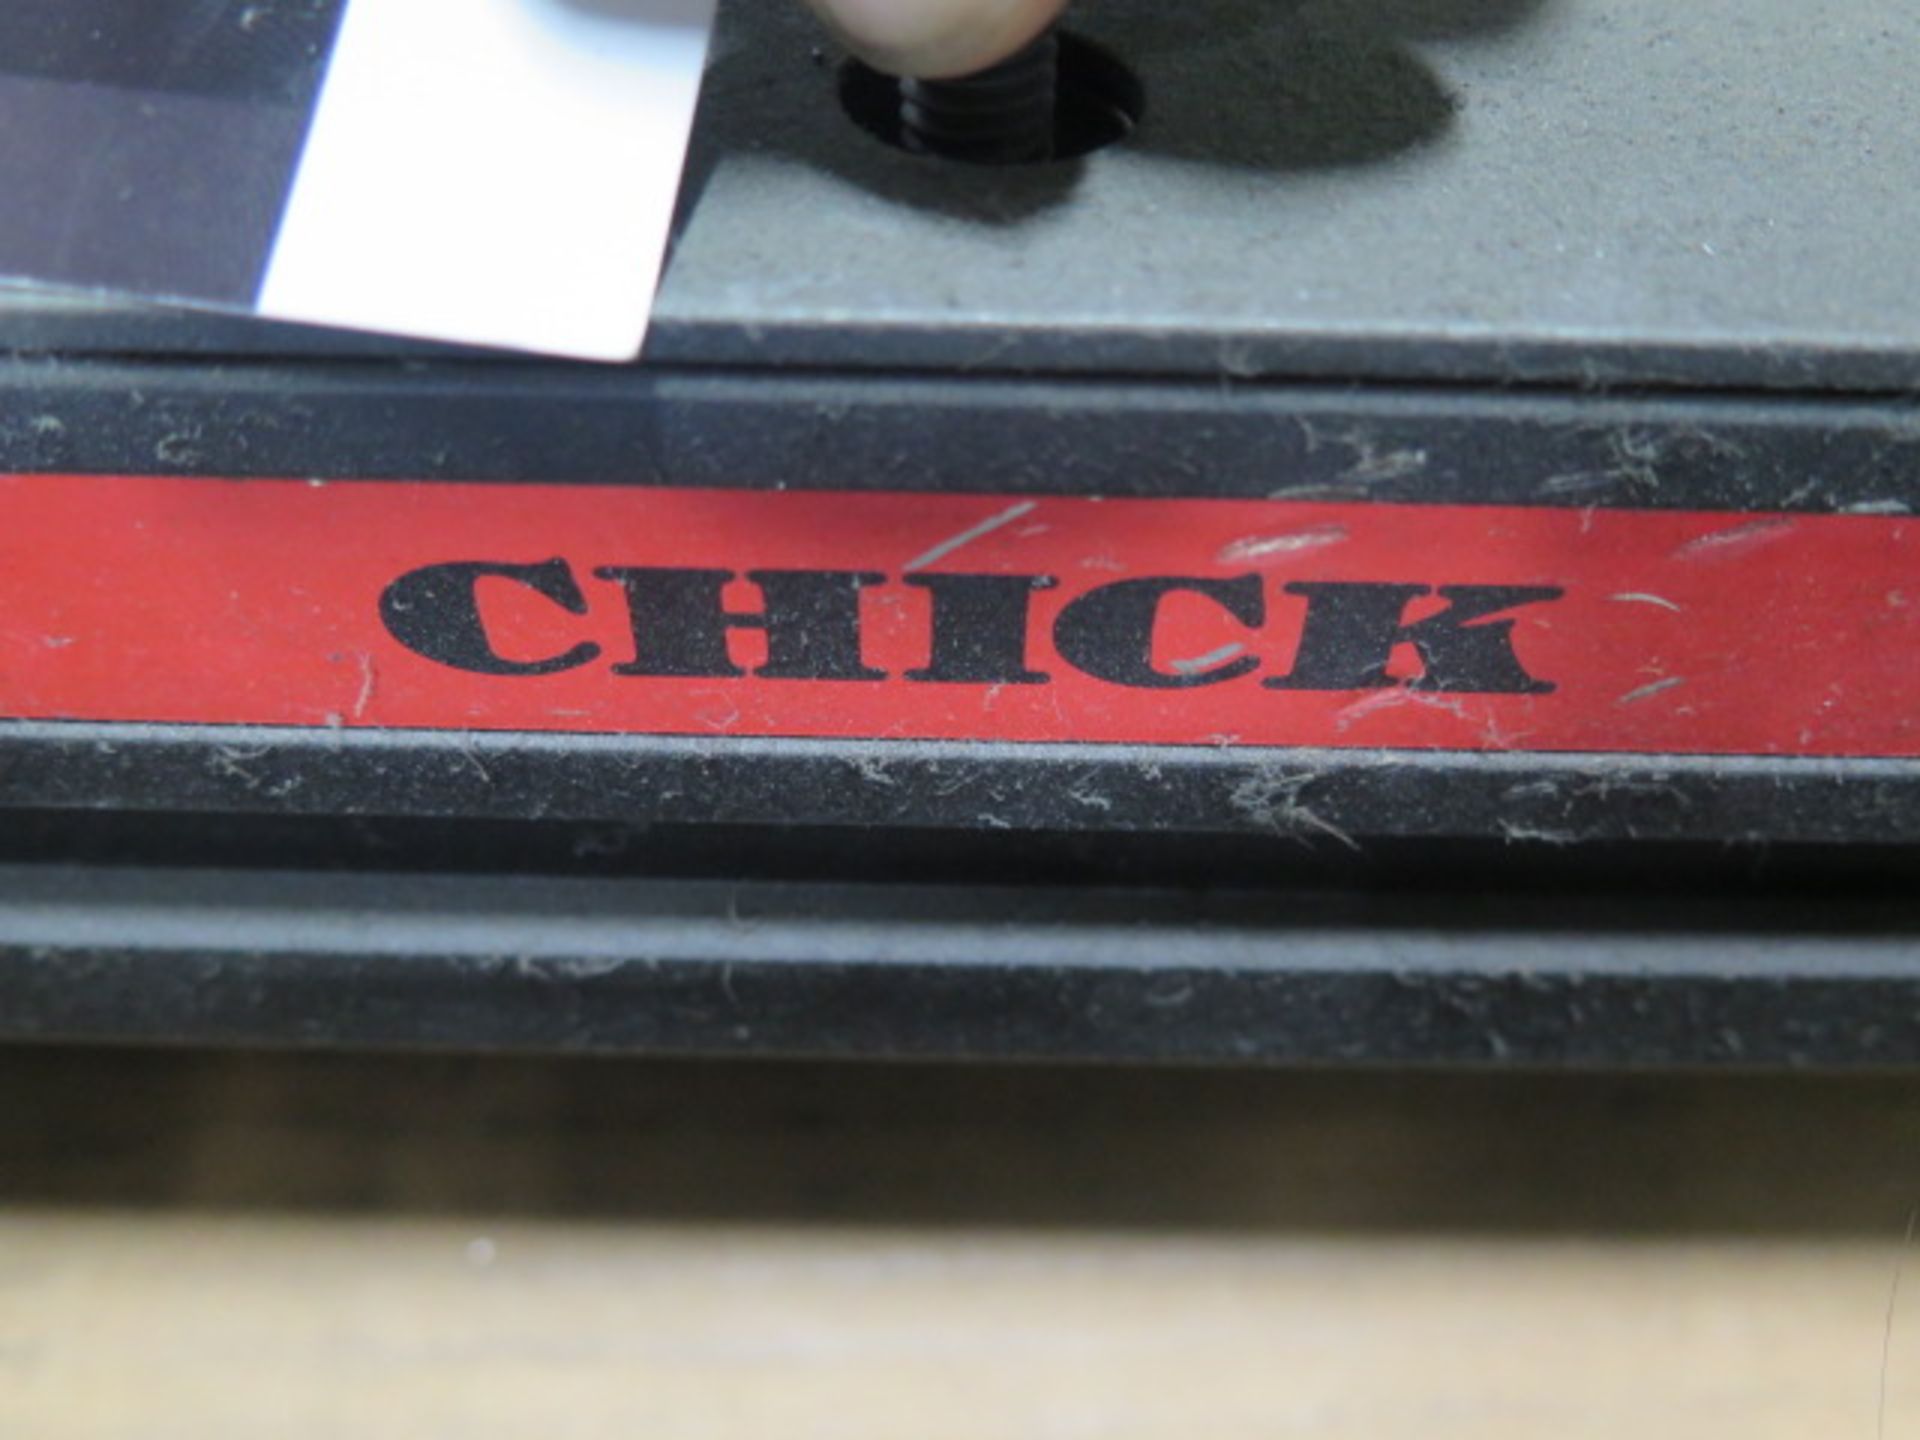 Chick 6" Double-Lock Vise (SOLD AS-IS - NO WARRANTY) - Image 6 of 6